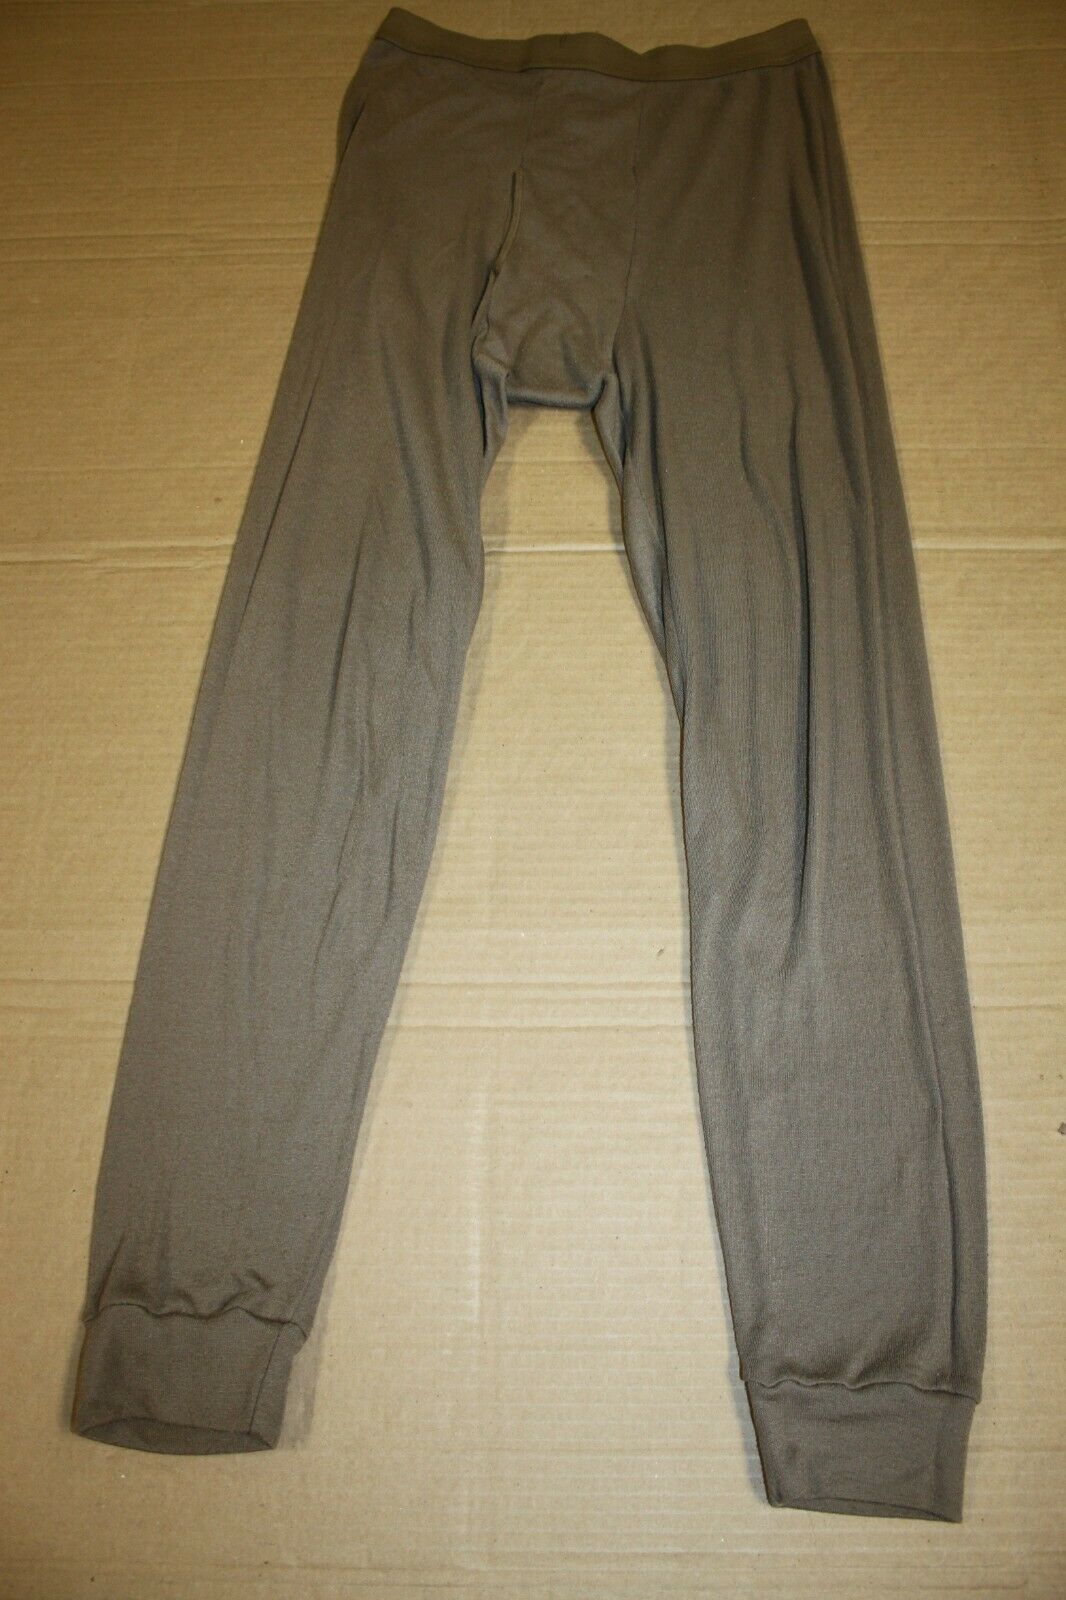 Genuine US Military Issue Thermal Pants Drawers LWCWUS Size Medium Brown Bottoms (USED)